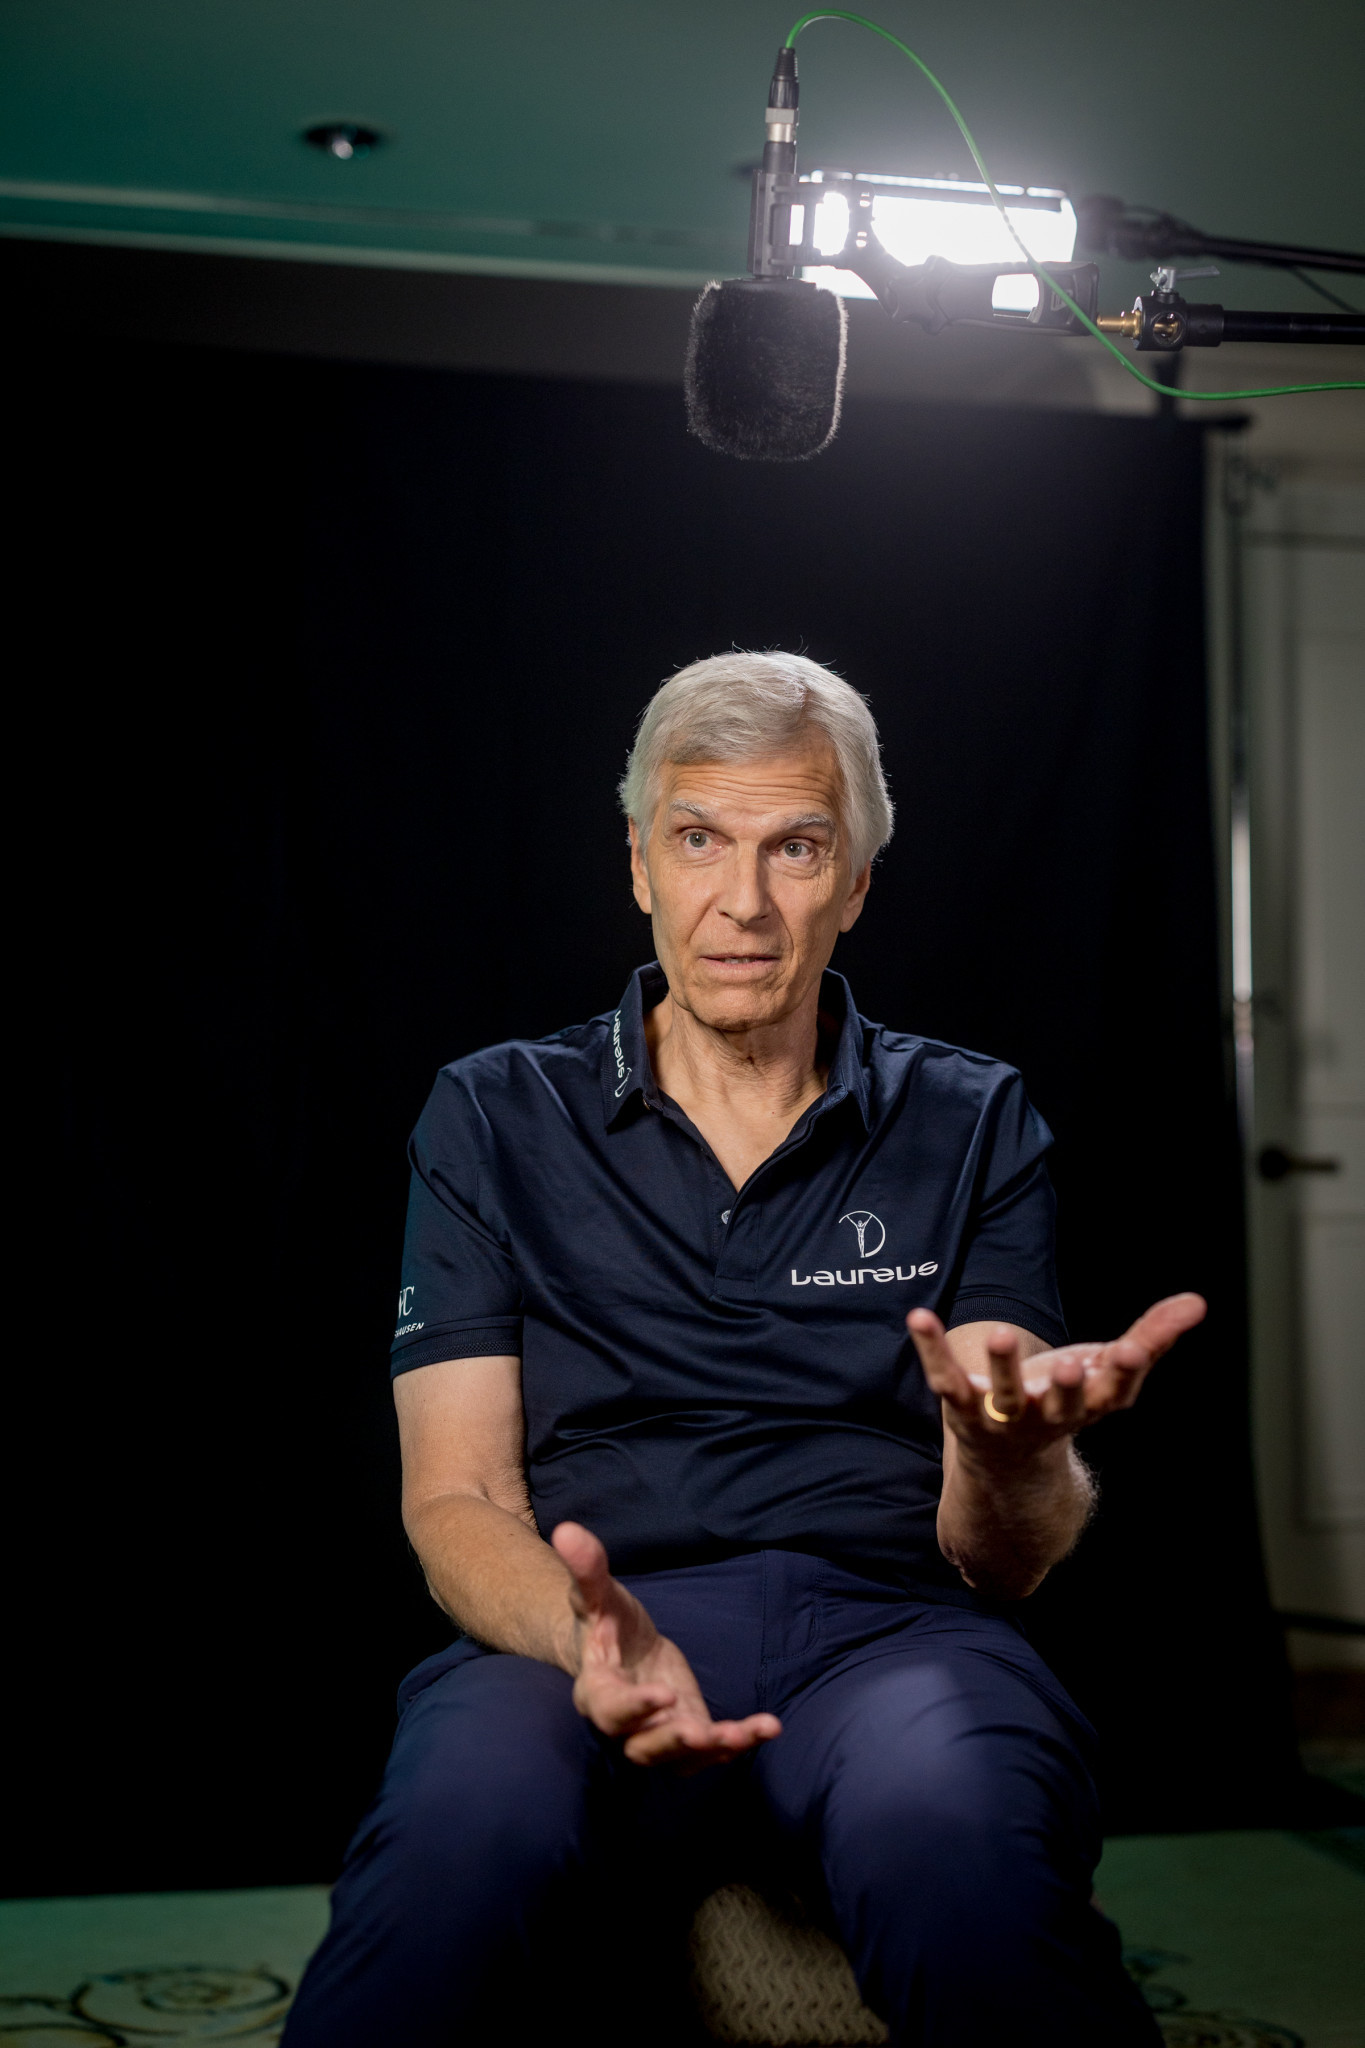 Mark Spitz has revealed how he was smuggled out of the Munich Olympic Village in 1972  ©Laureus Sport for Good